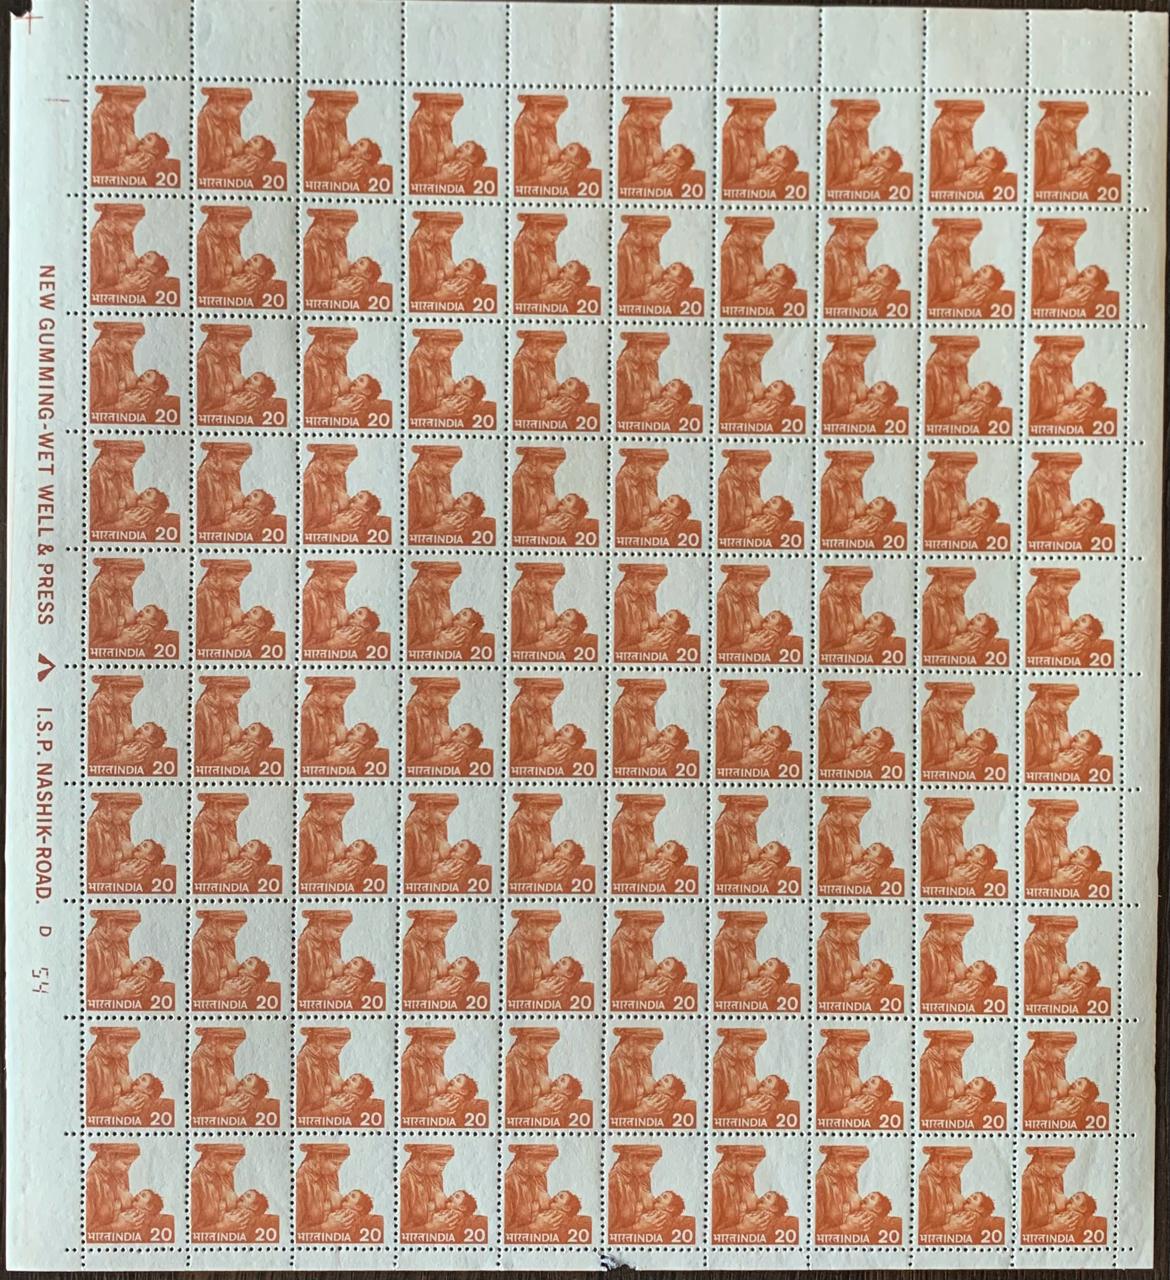 India Definitive 6th Mother & Child Full Sheet